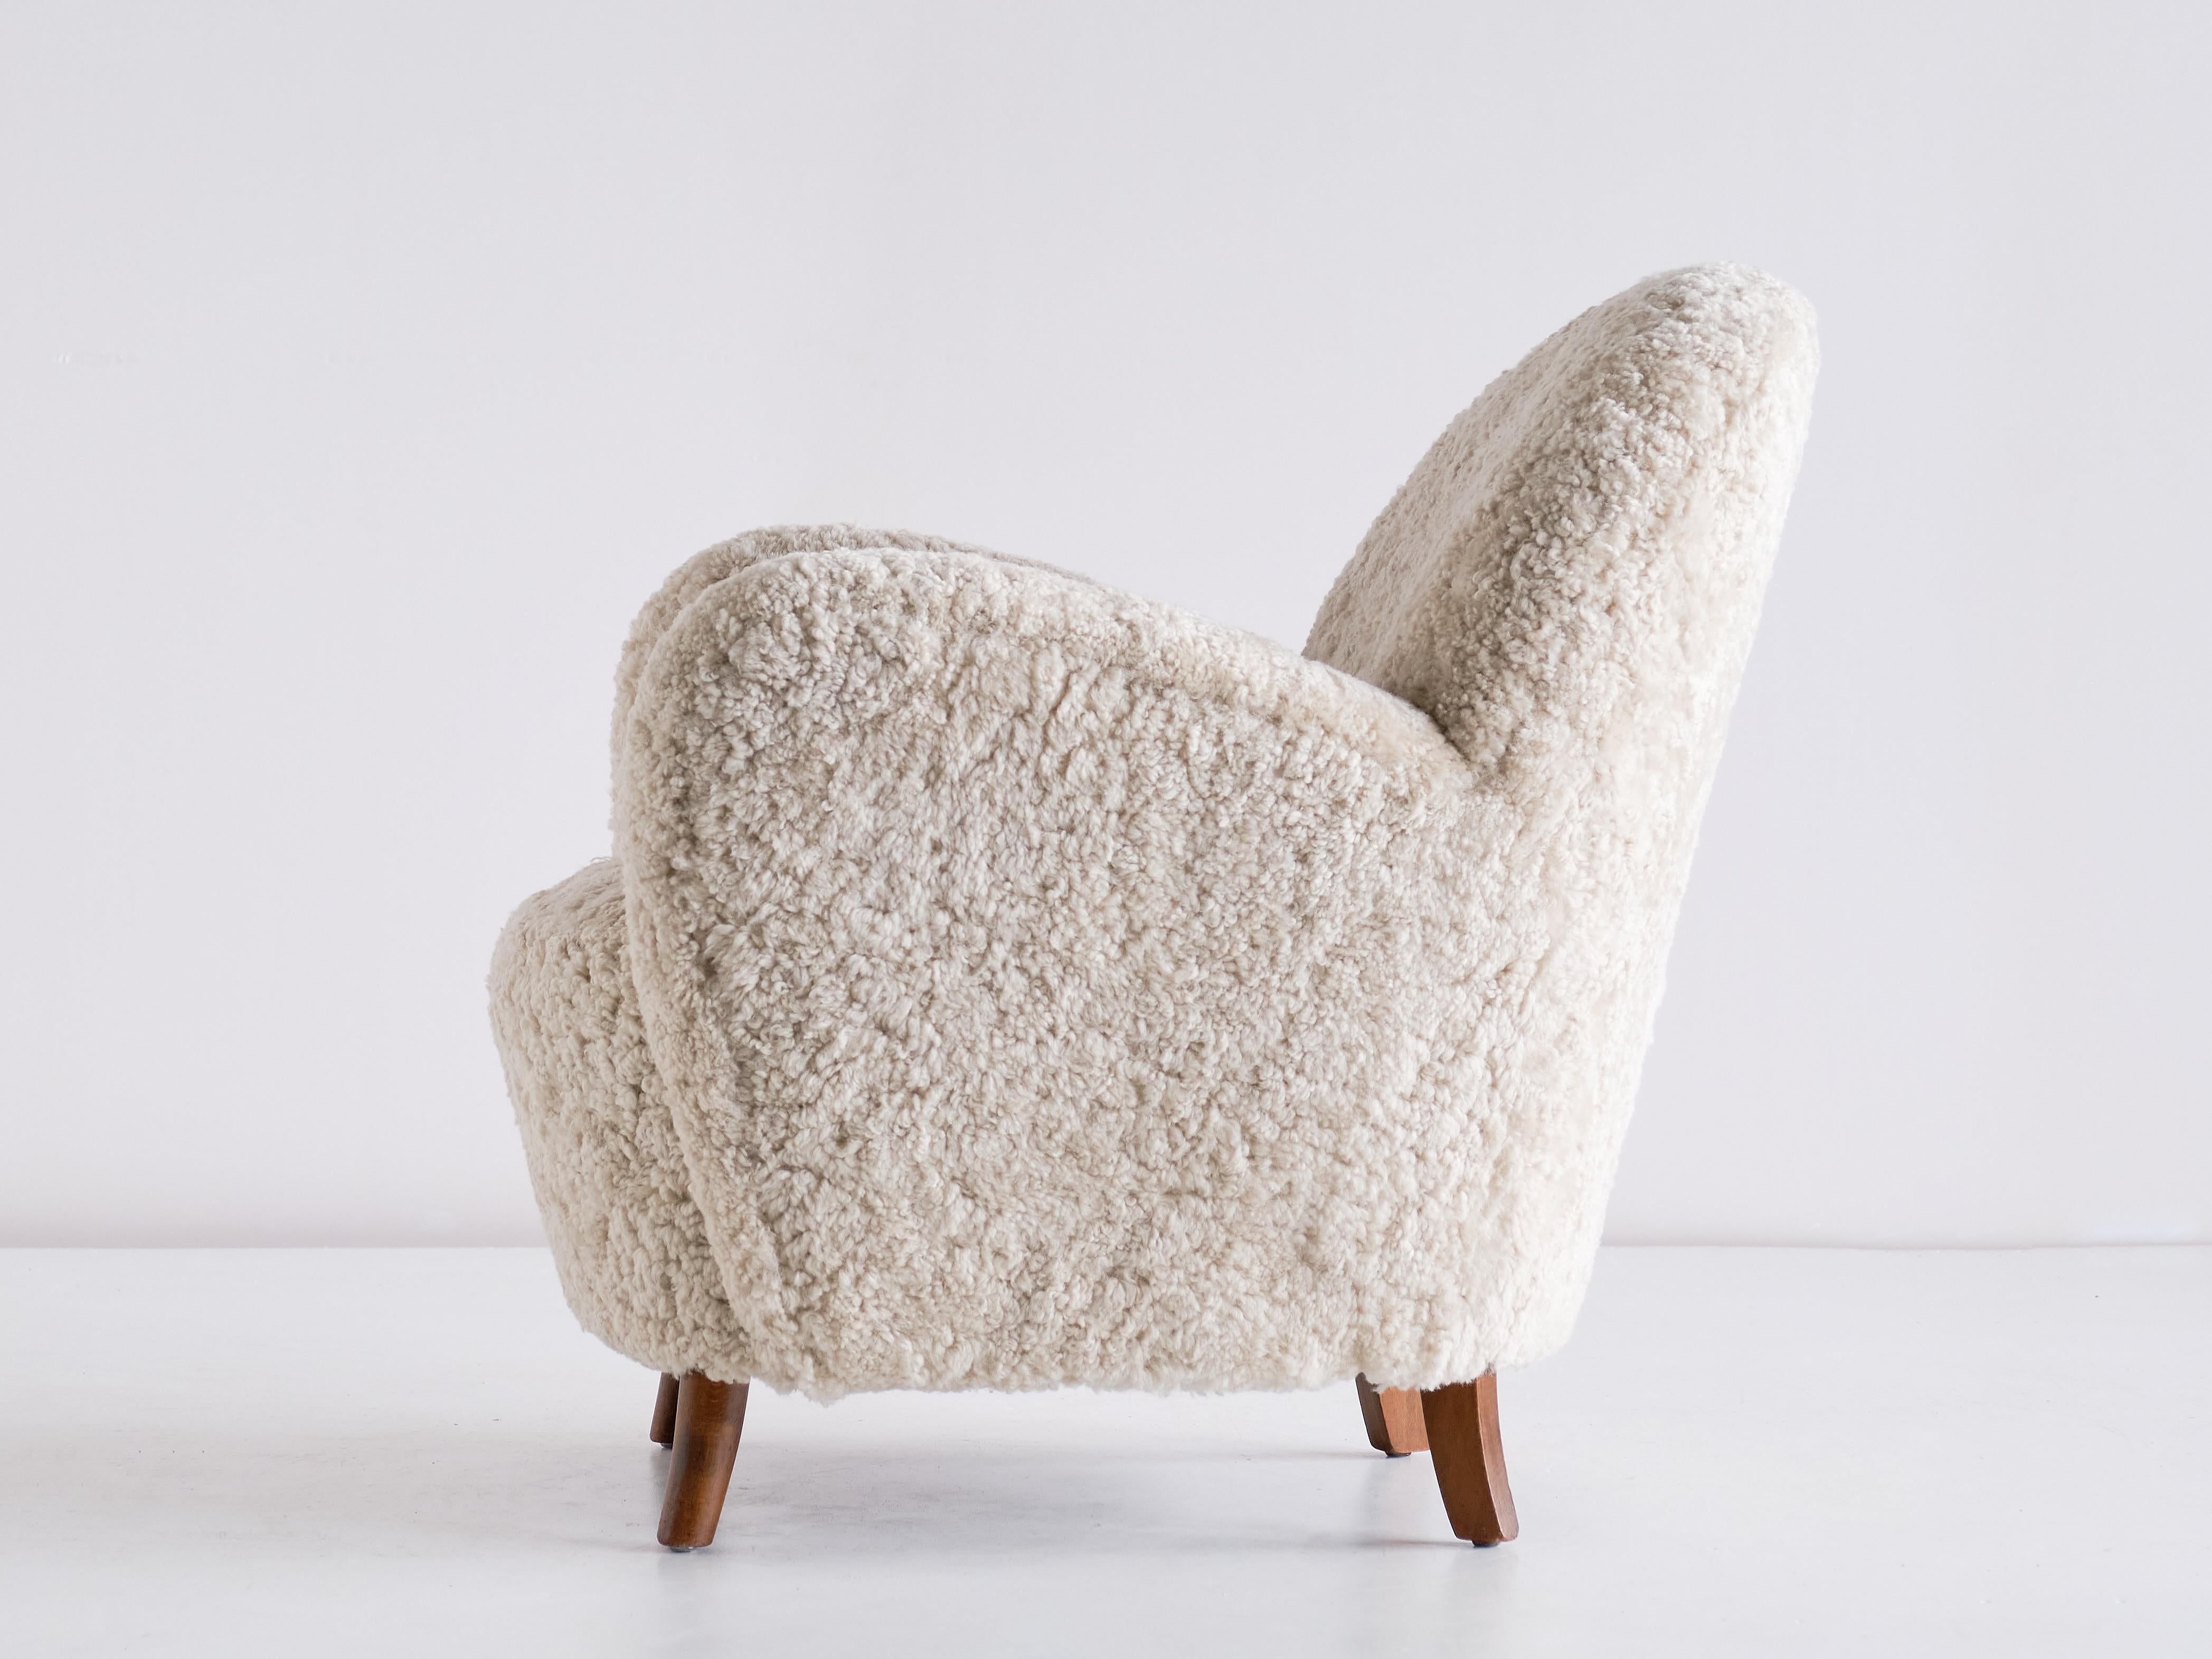 Pair of Thorald Madsen Armchairs in Sheepskin and Beech, Denmark, Mid 1930s For Sale 7